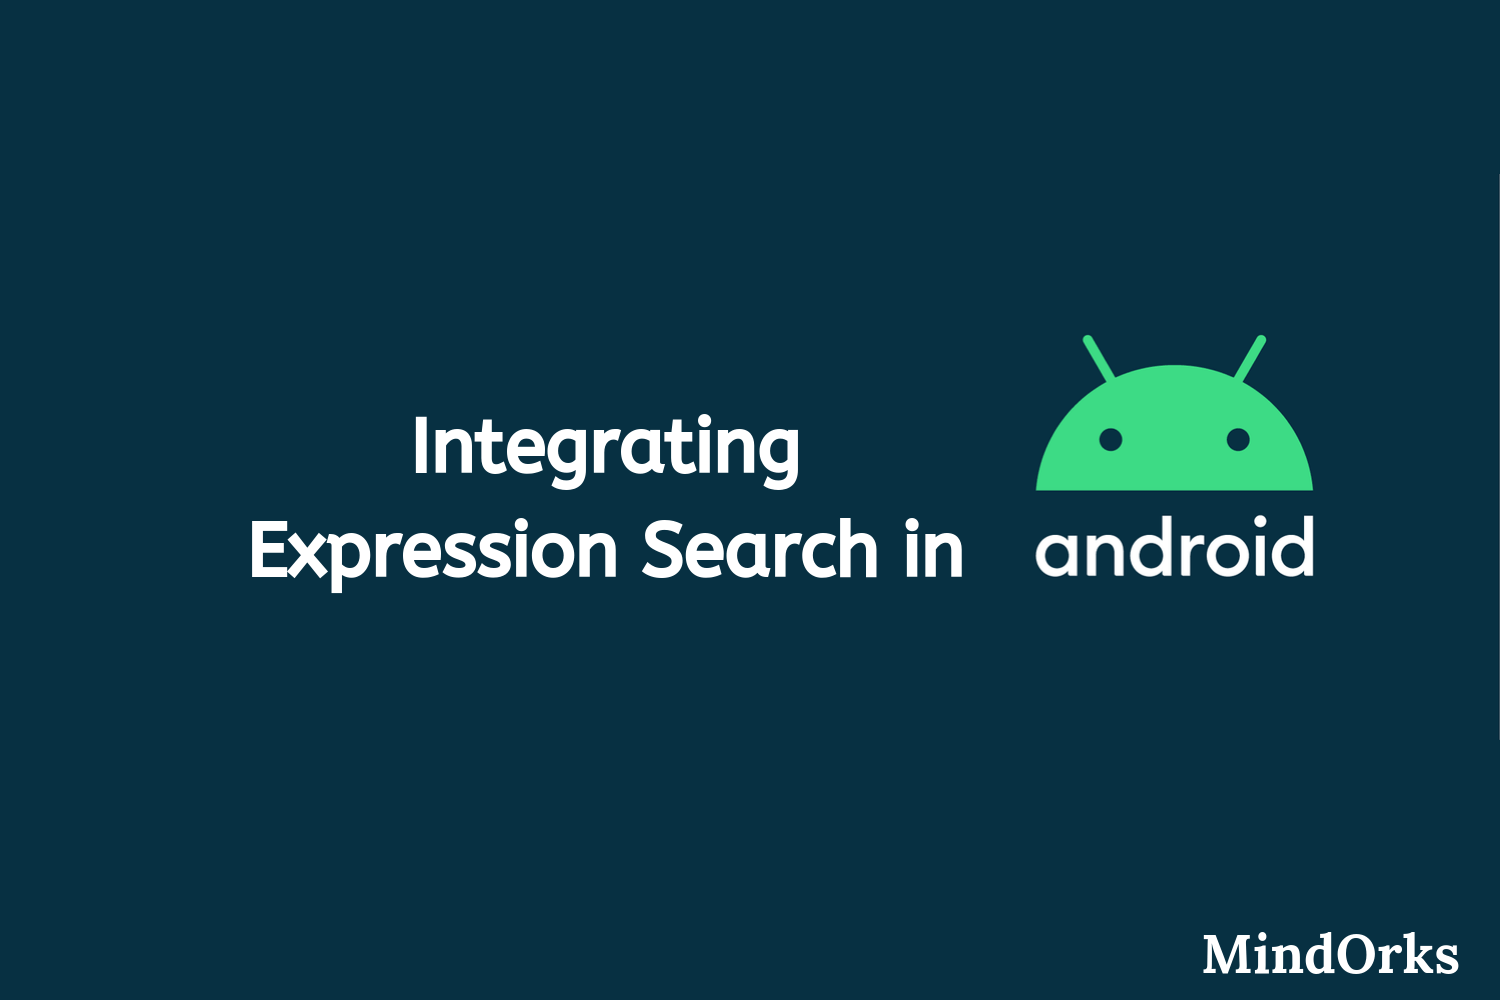 Integrating Expression Search in Android app